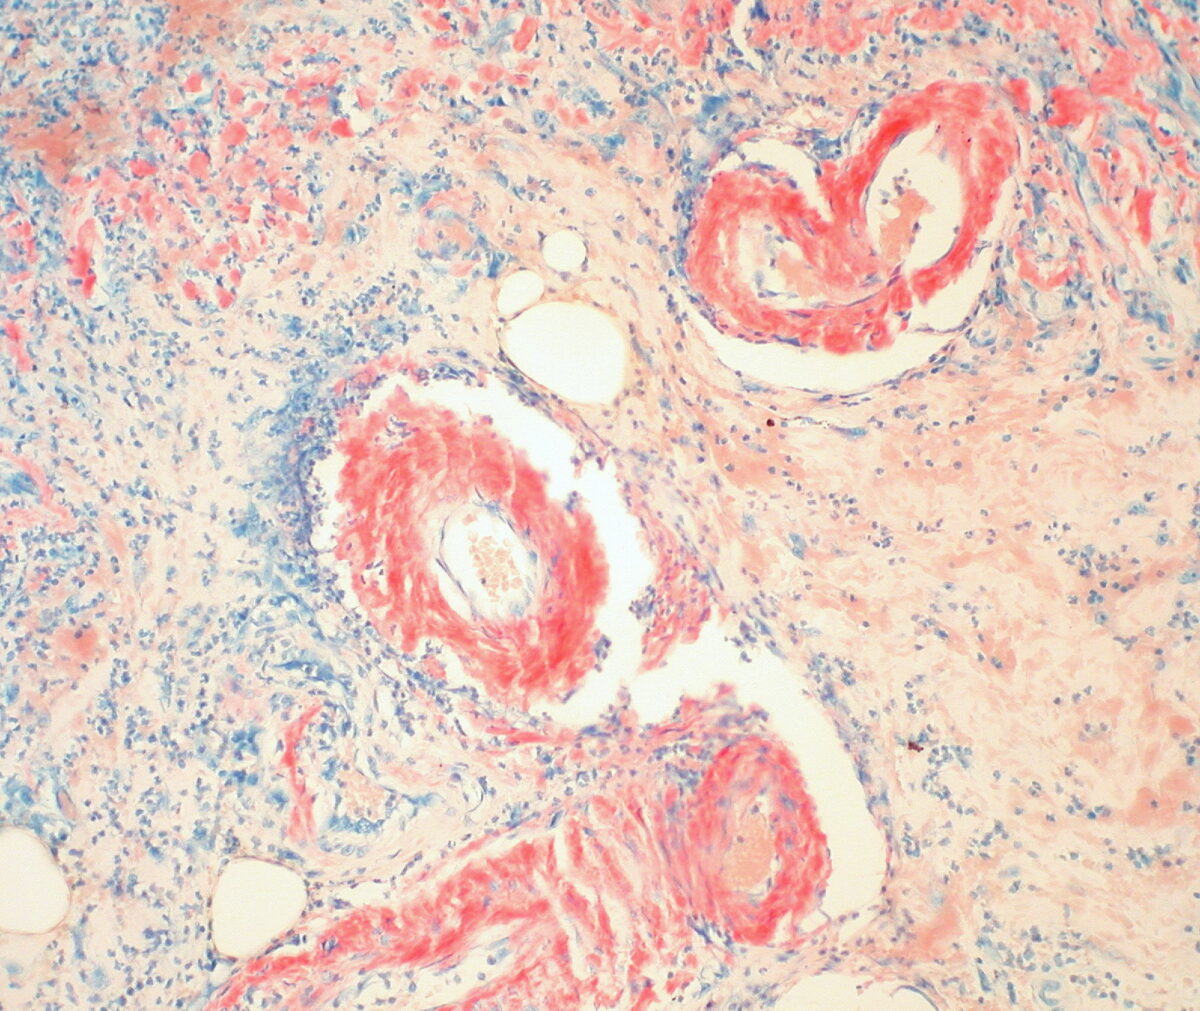 Gastric amyloidosis with h&e staining